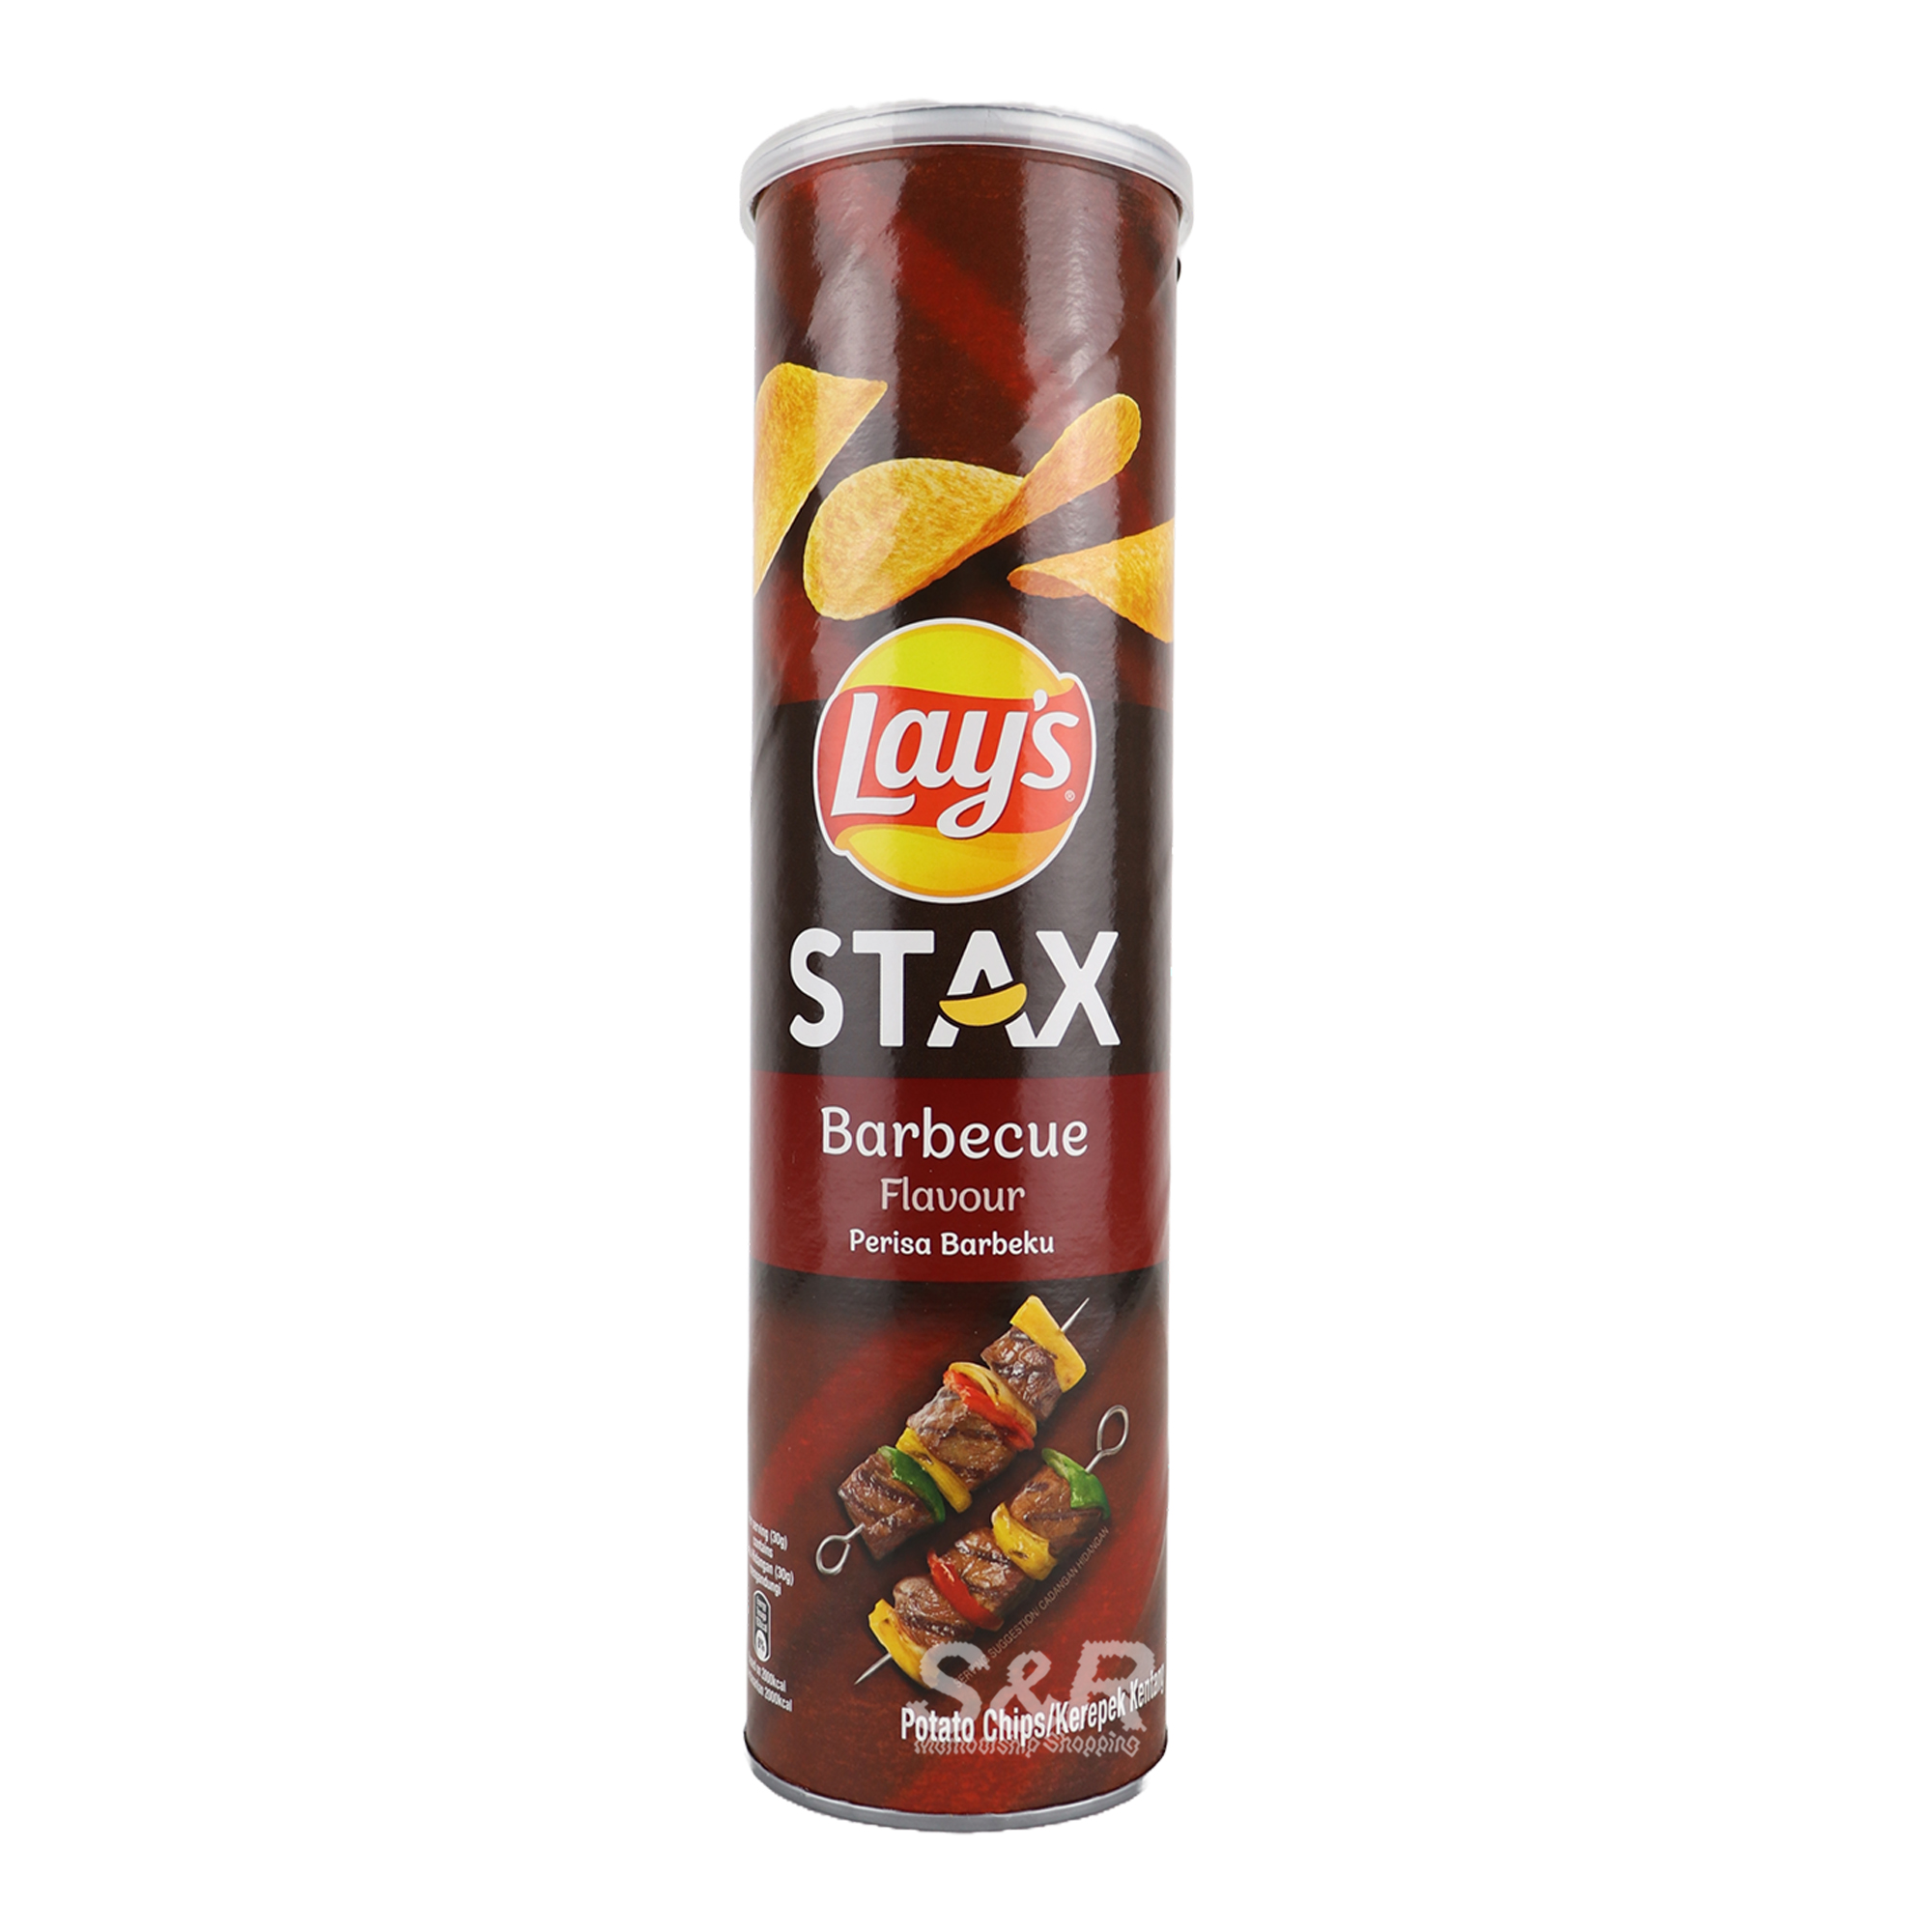 Lays Stax Barbeque Flavor 135g